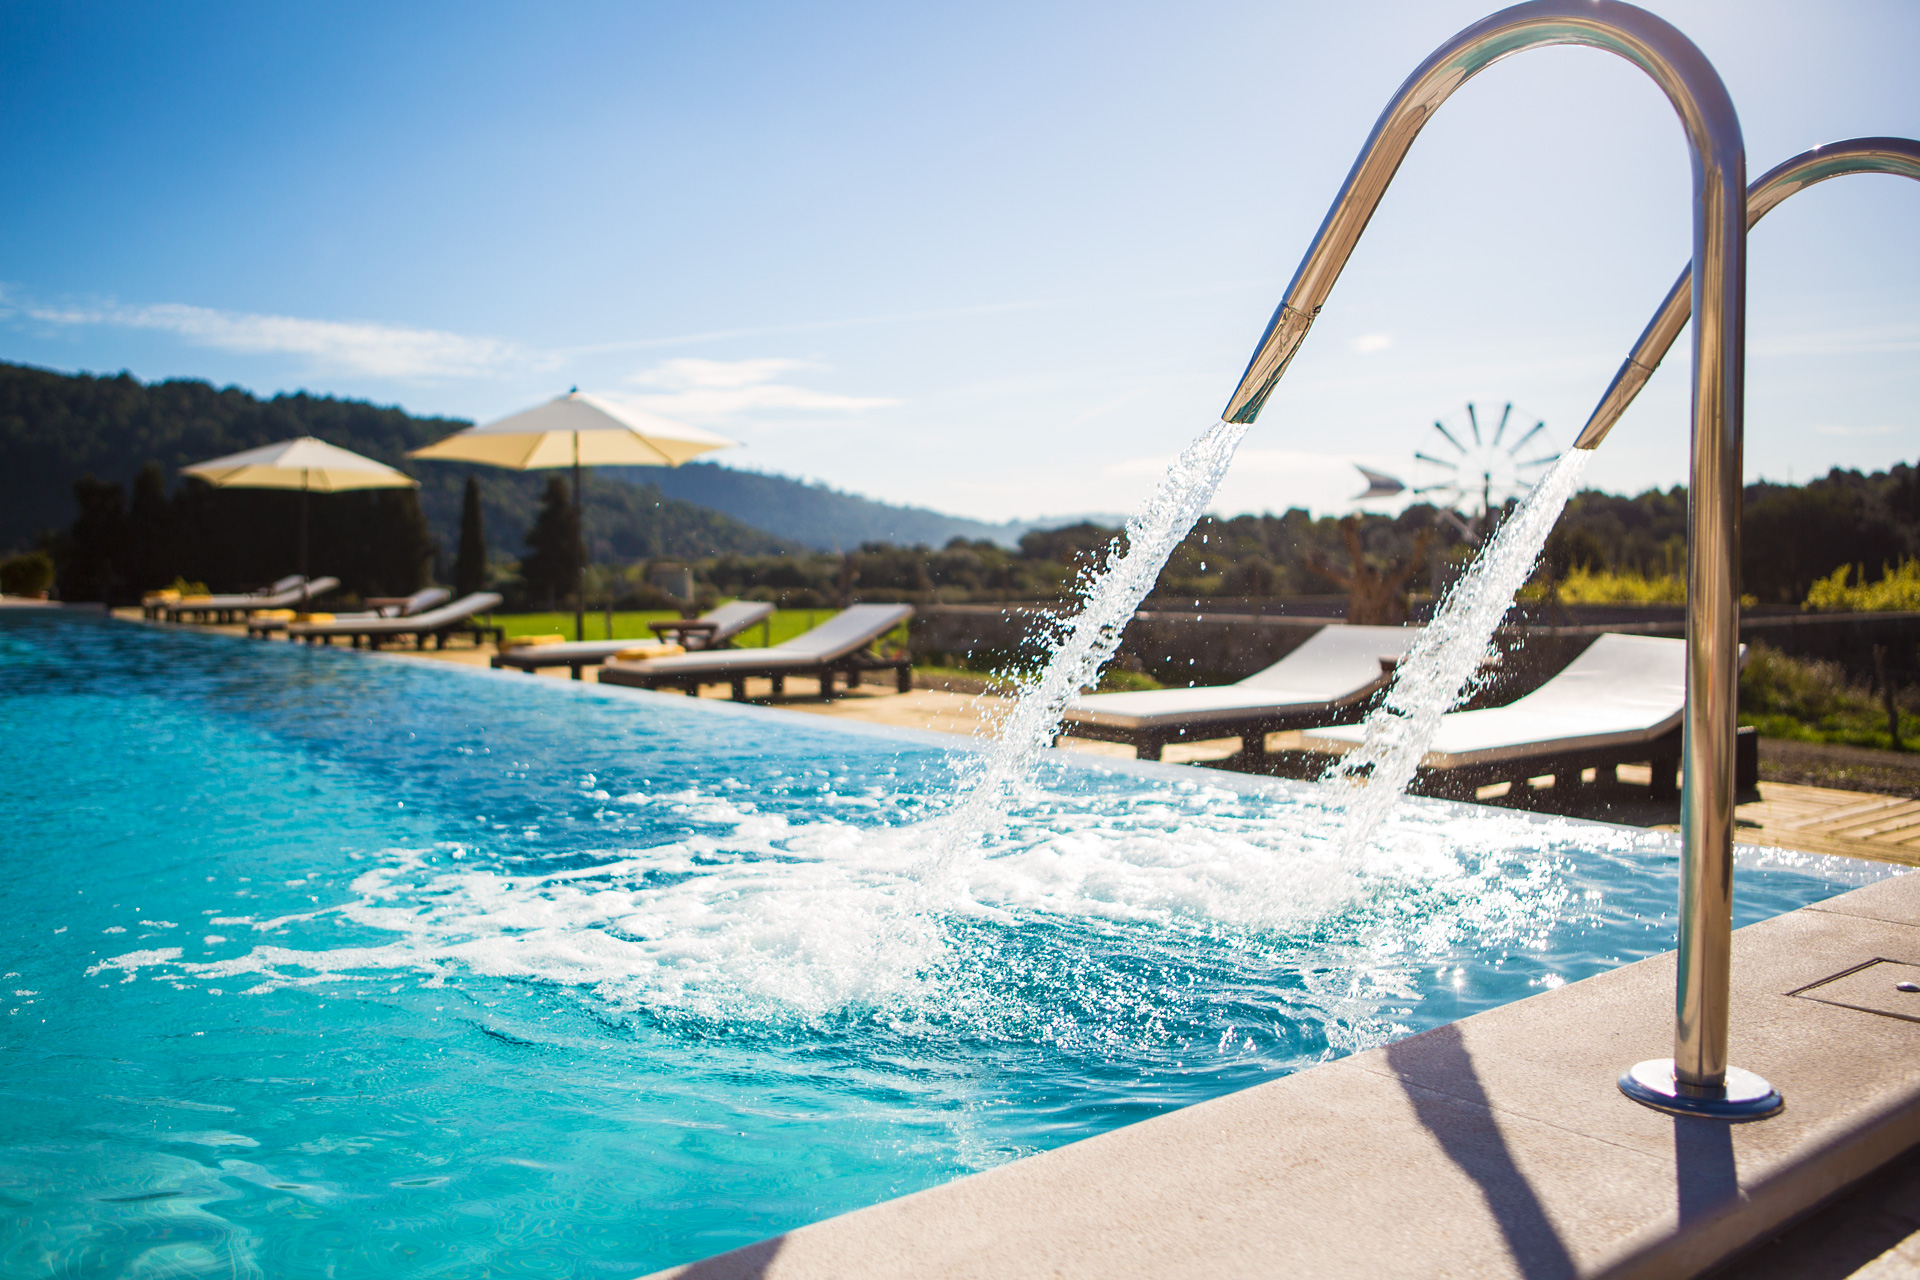 Let nothing change your desires to visit Majorca. Monnaber Nou is waiting for you very soon! - monnaber nou pool 1 - Hotel Rural Monnaber Nou Mallorca